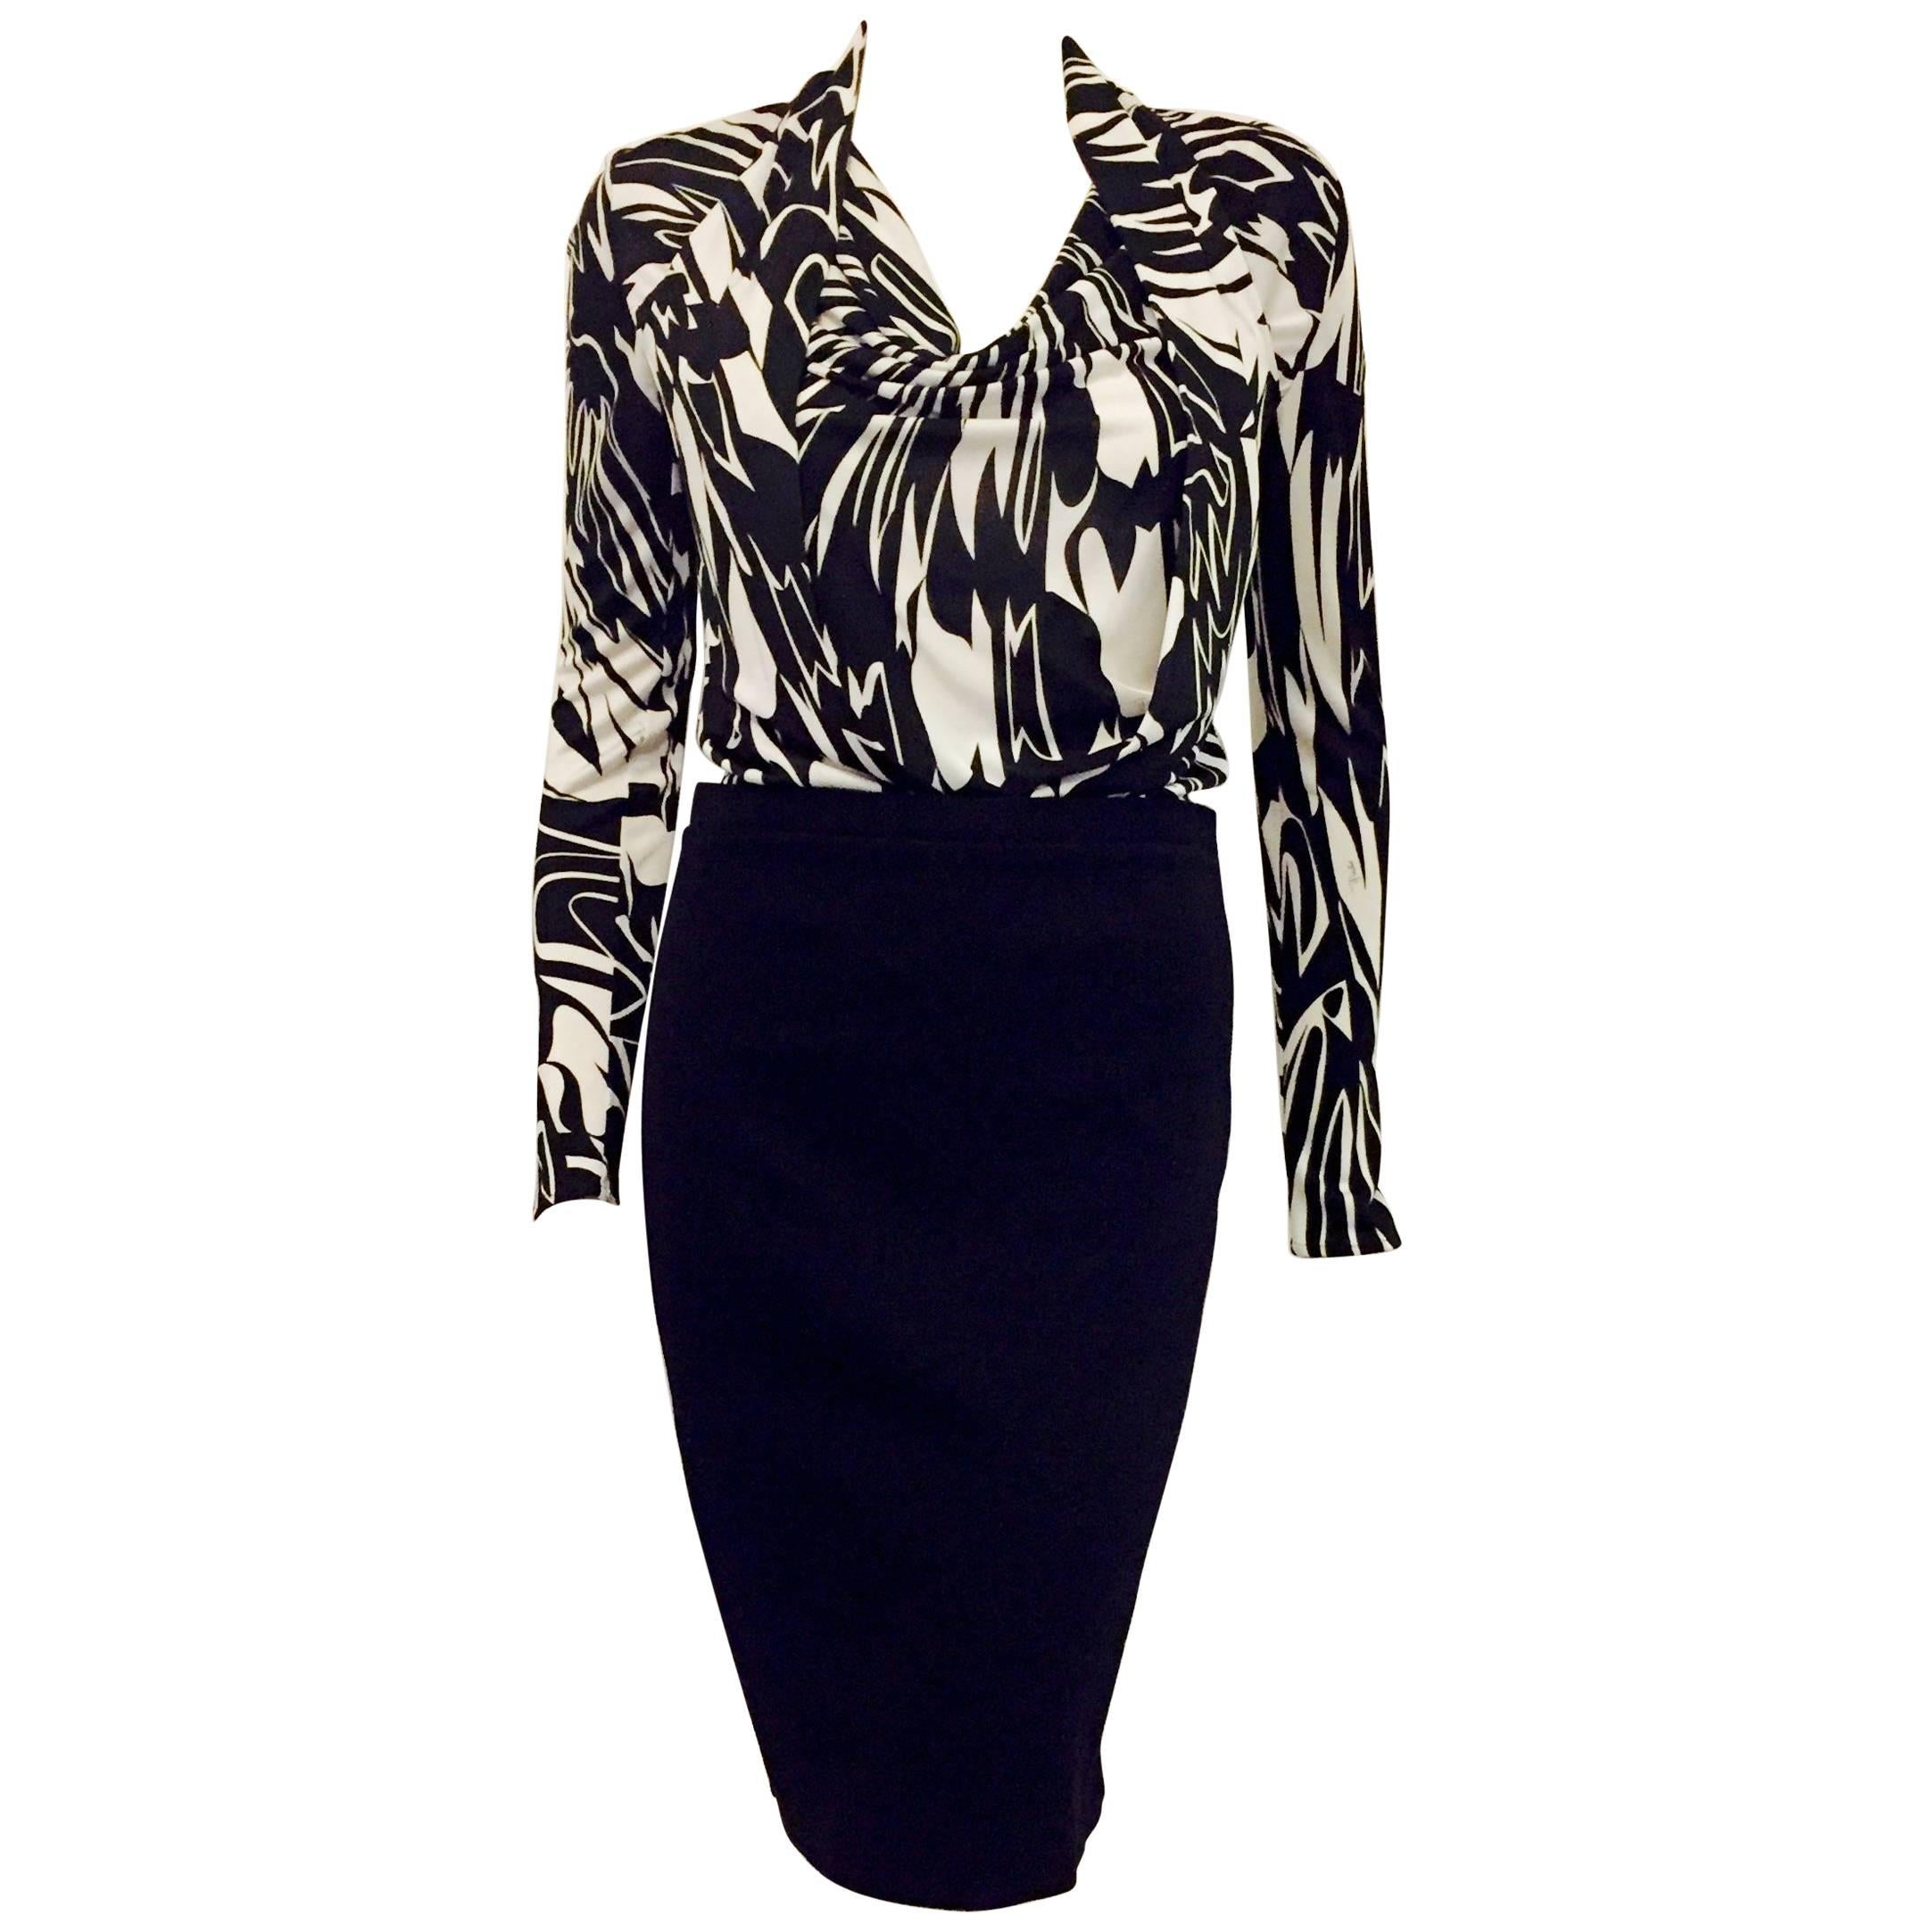 Elegant Emilio Pucci Black & White Long Sleeve Dress with Pencil Skirt For Sale